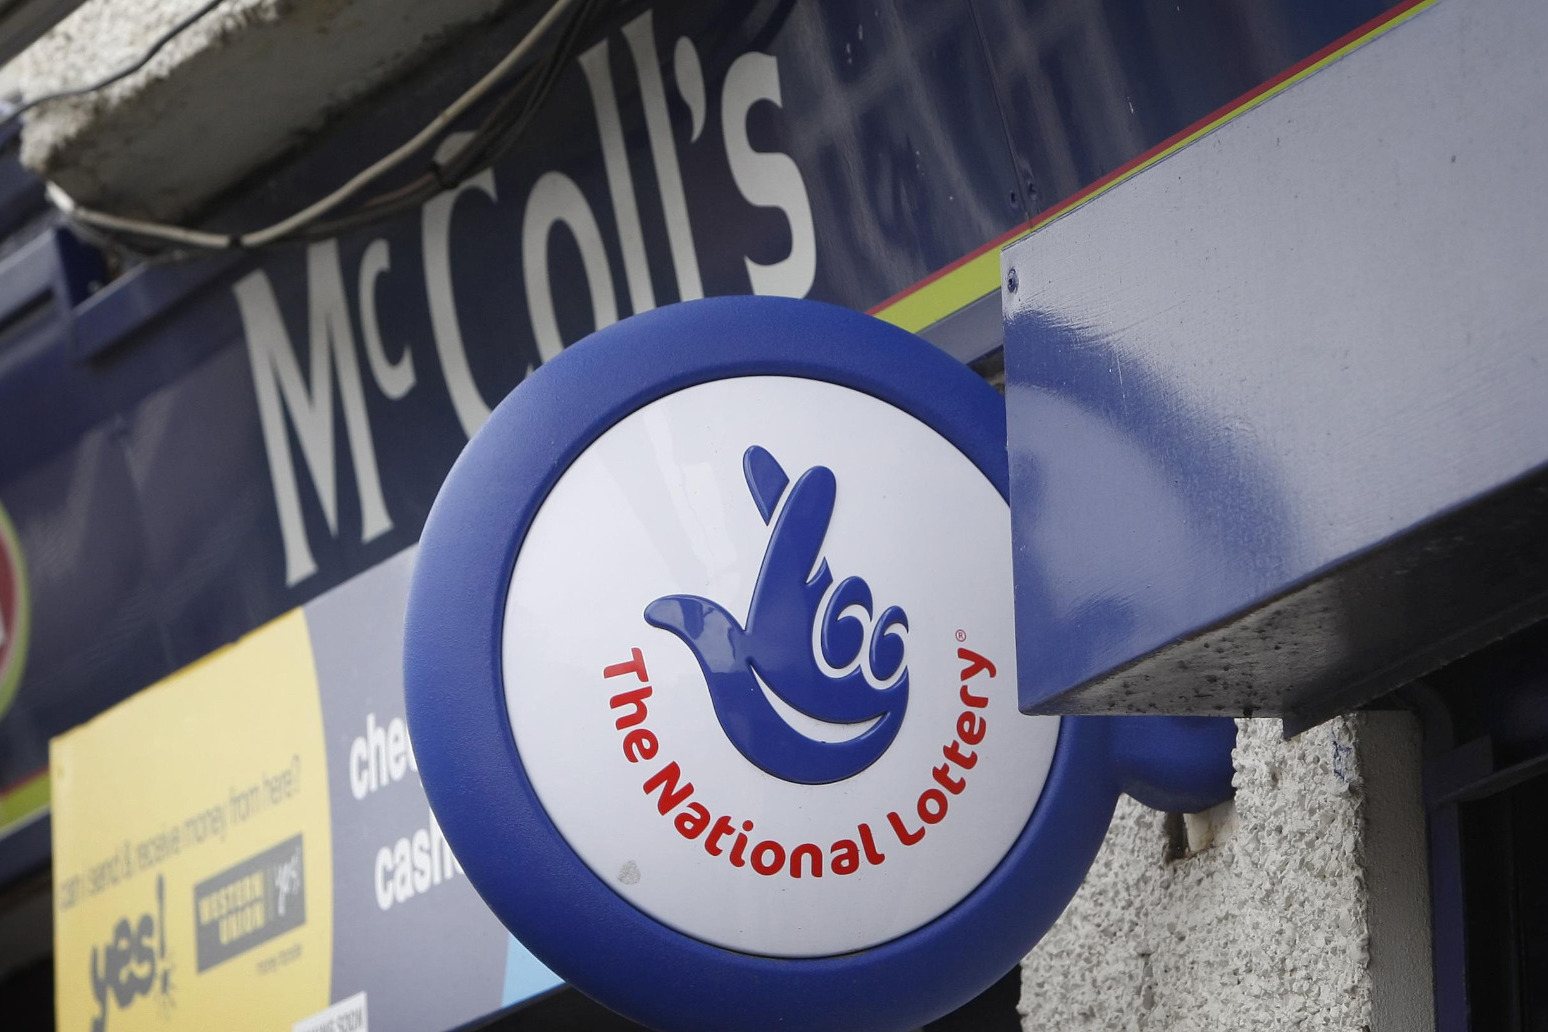 McColls boss quits amid battle to secure chains future